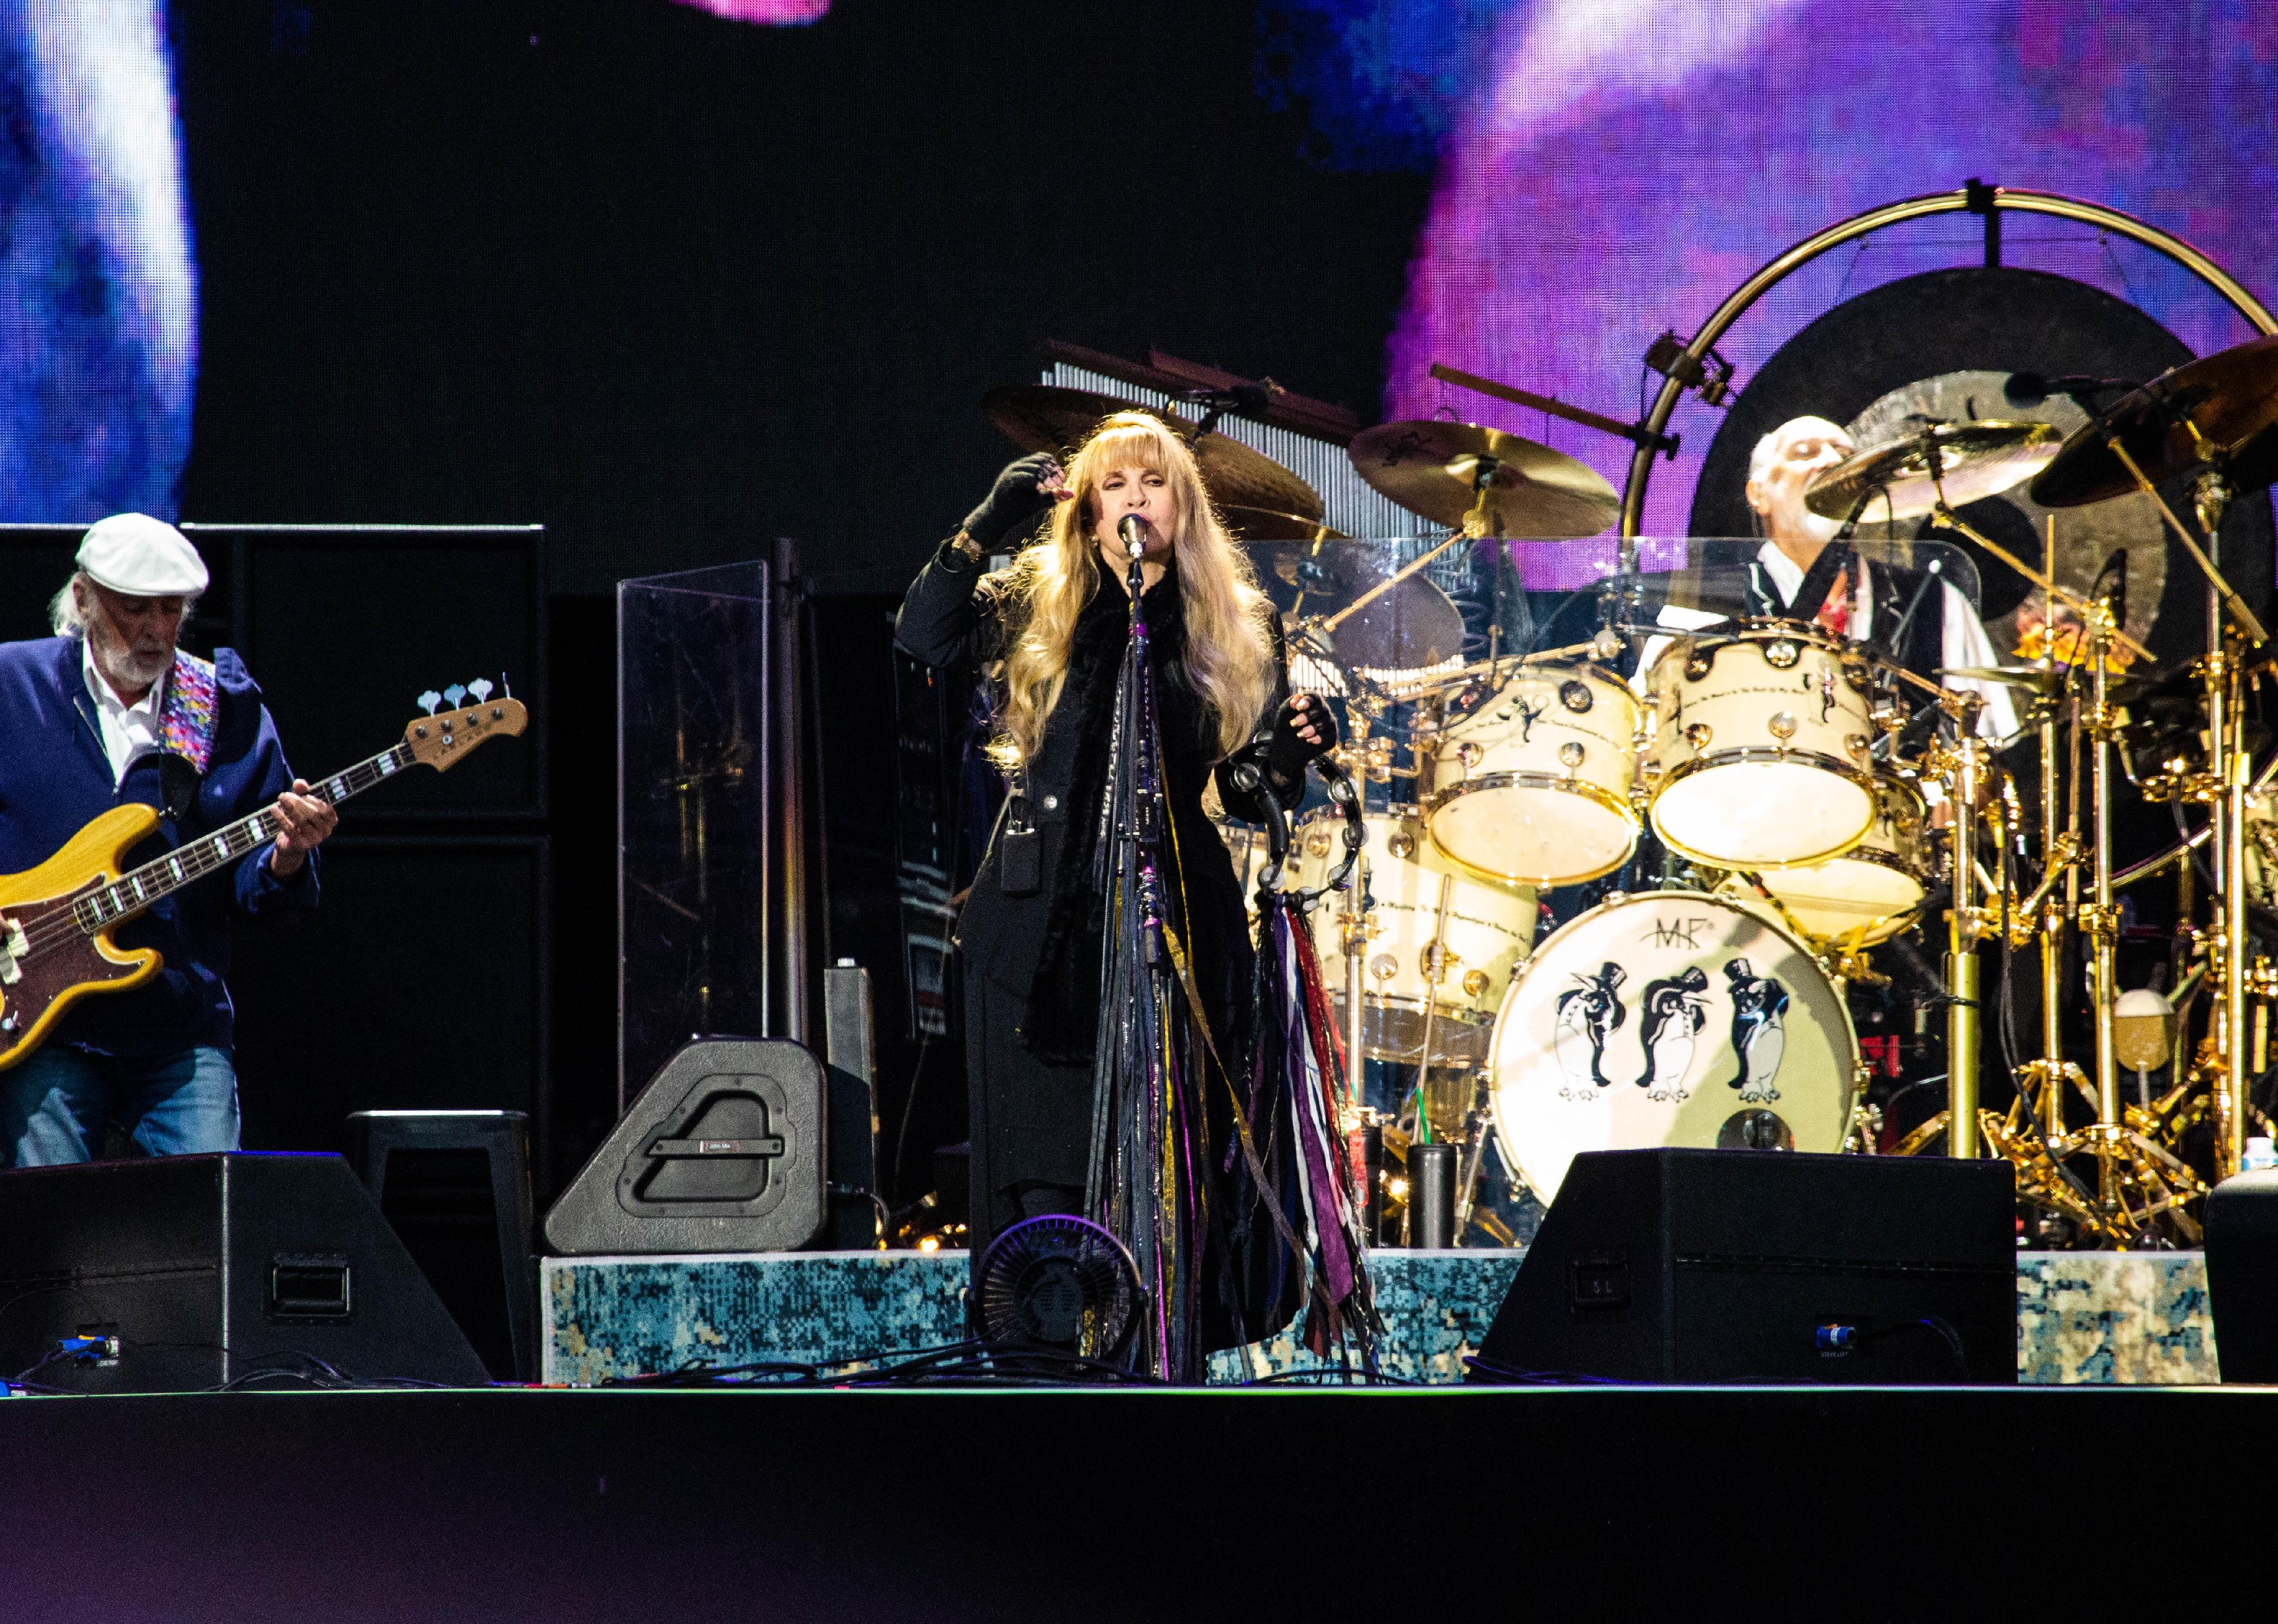 Fleetwood Mac performing live at Pinkpop Festival 2019 in Netherlands.